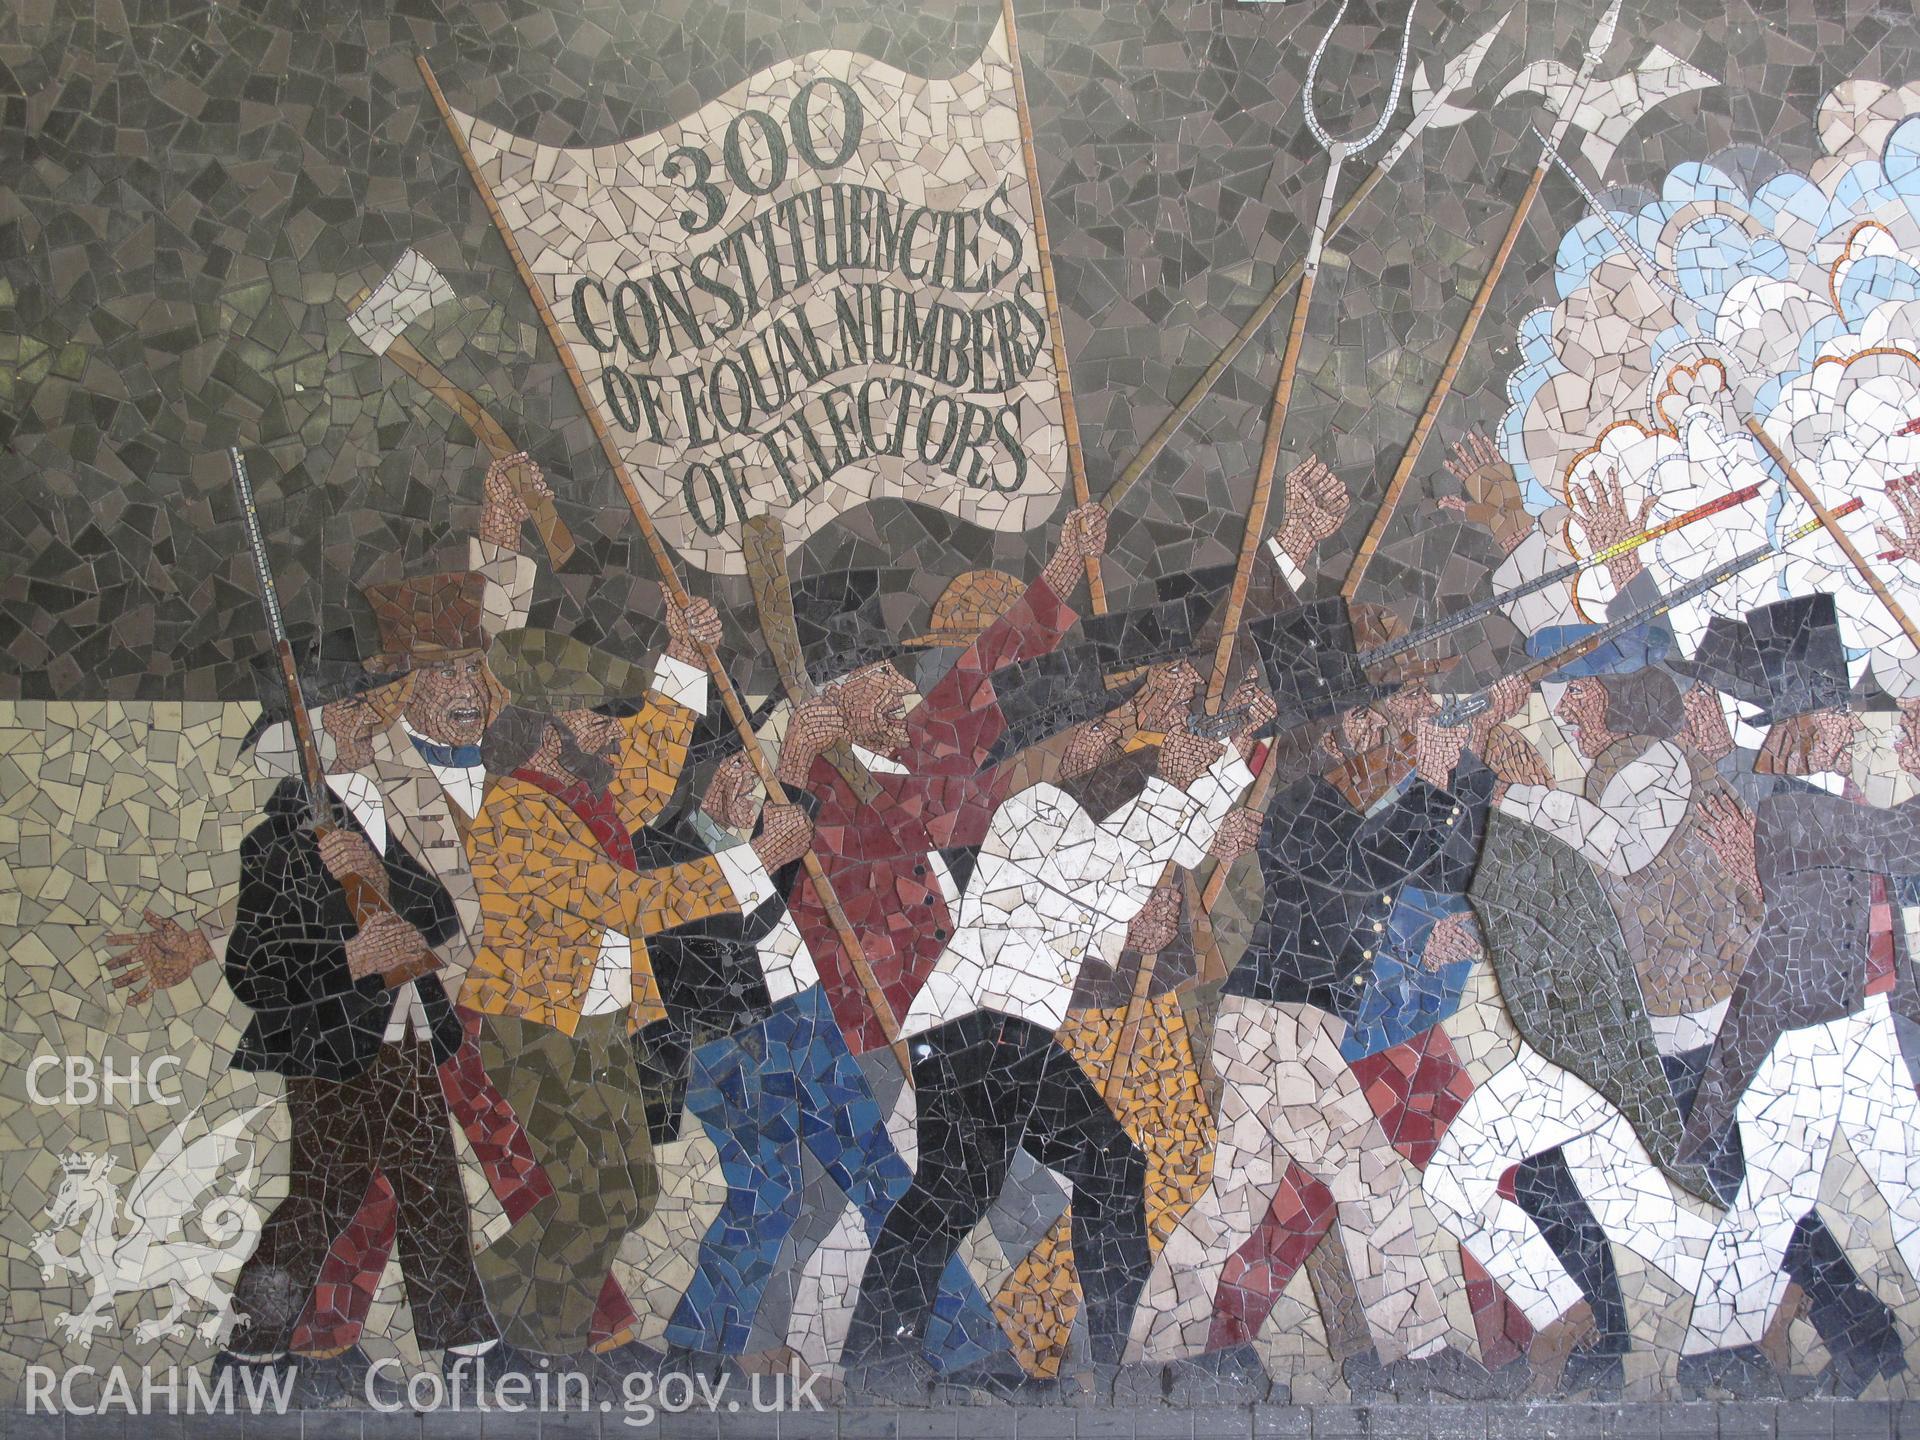 Chartist Uprising Mural, Newport, taken by Brian Malaws on 01 March 2010.